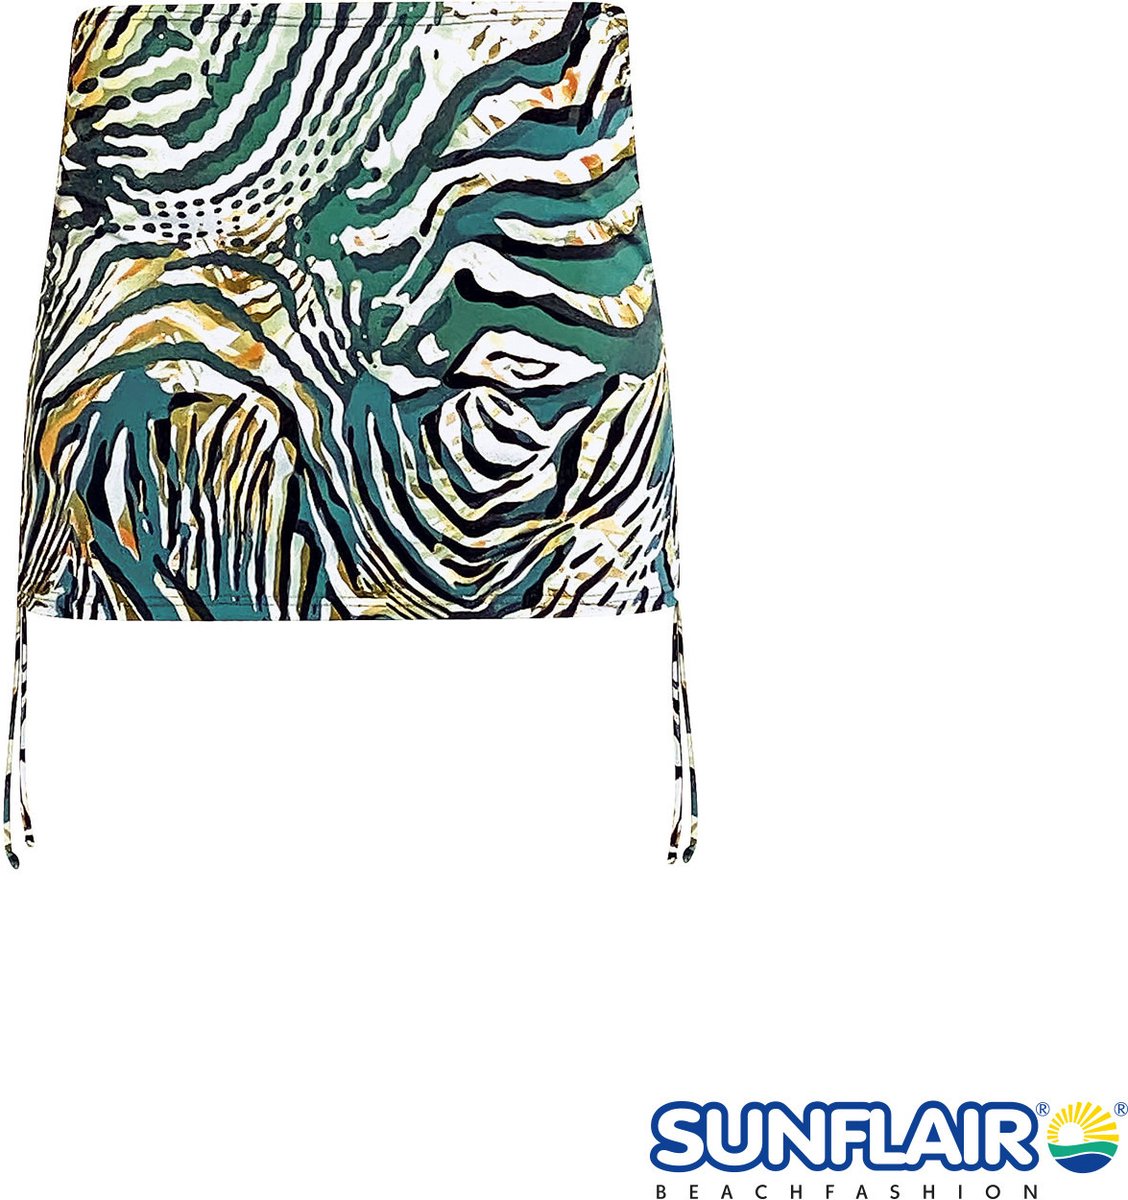 Sunflair - Rokje - Multicolor - Maat 38 - Sunflair